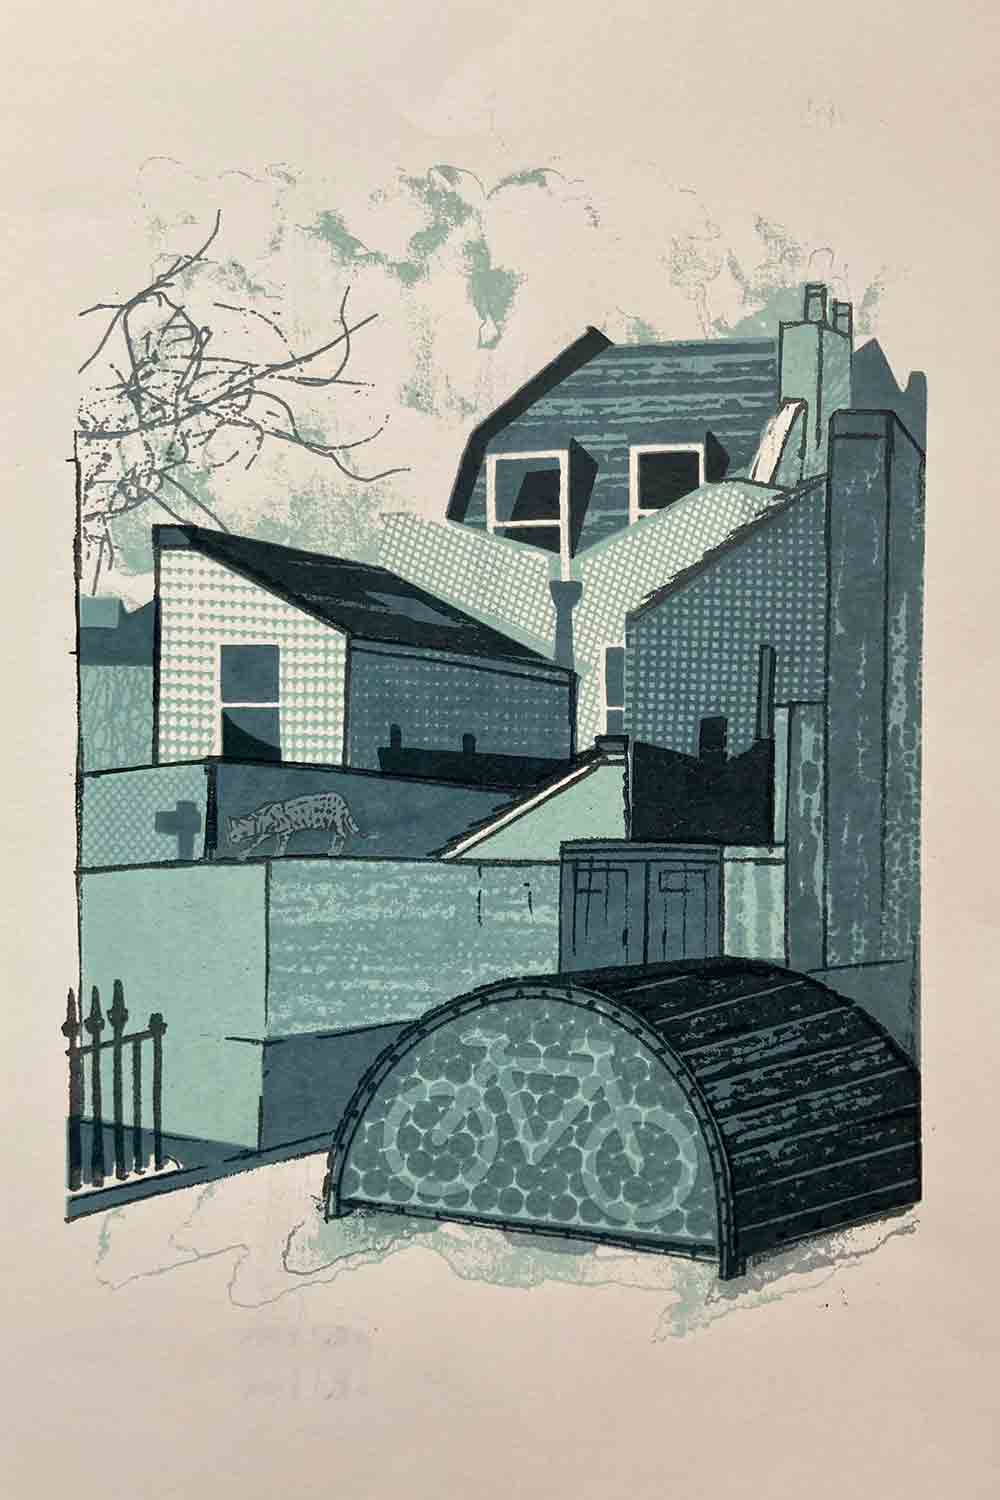 Screen print of the back of houses and a bicycle shelter on Kenilworth Road, Bow.